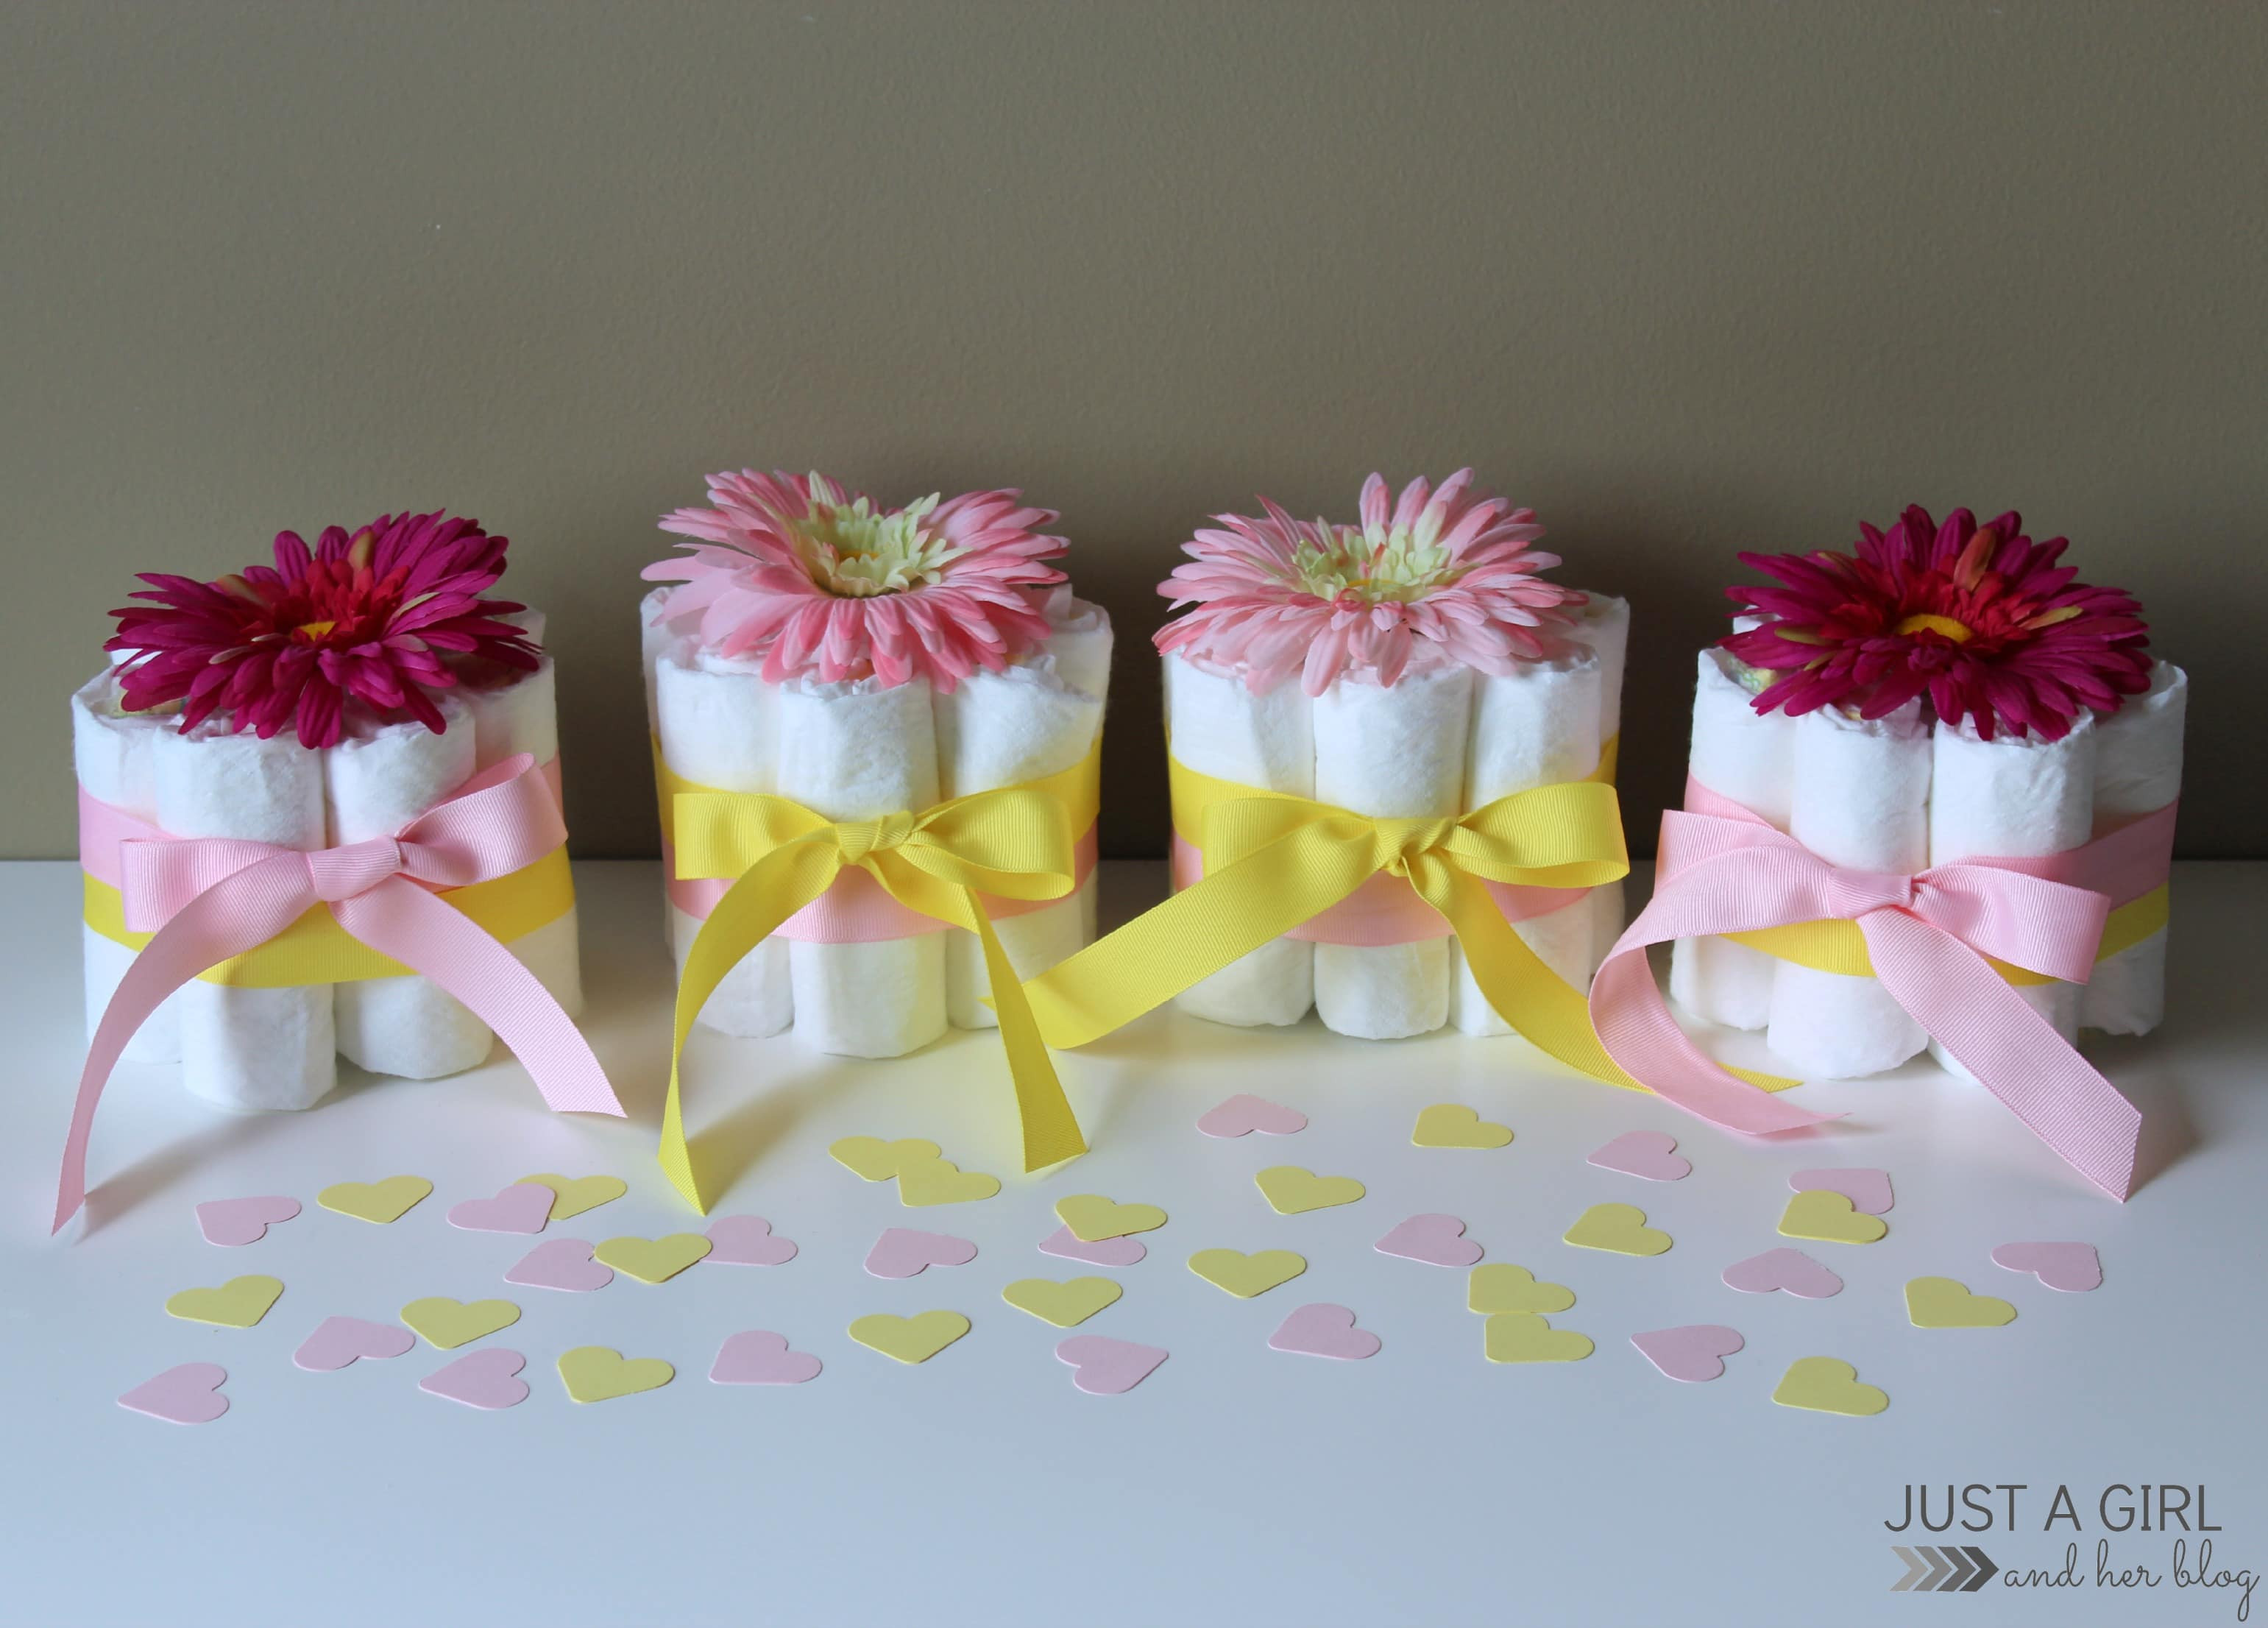 DIY Baby Shower Centerpieces
 Sweet and Simple Baby Shower Centerpieces